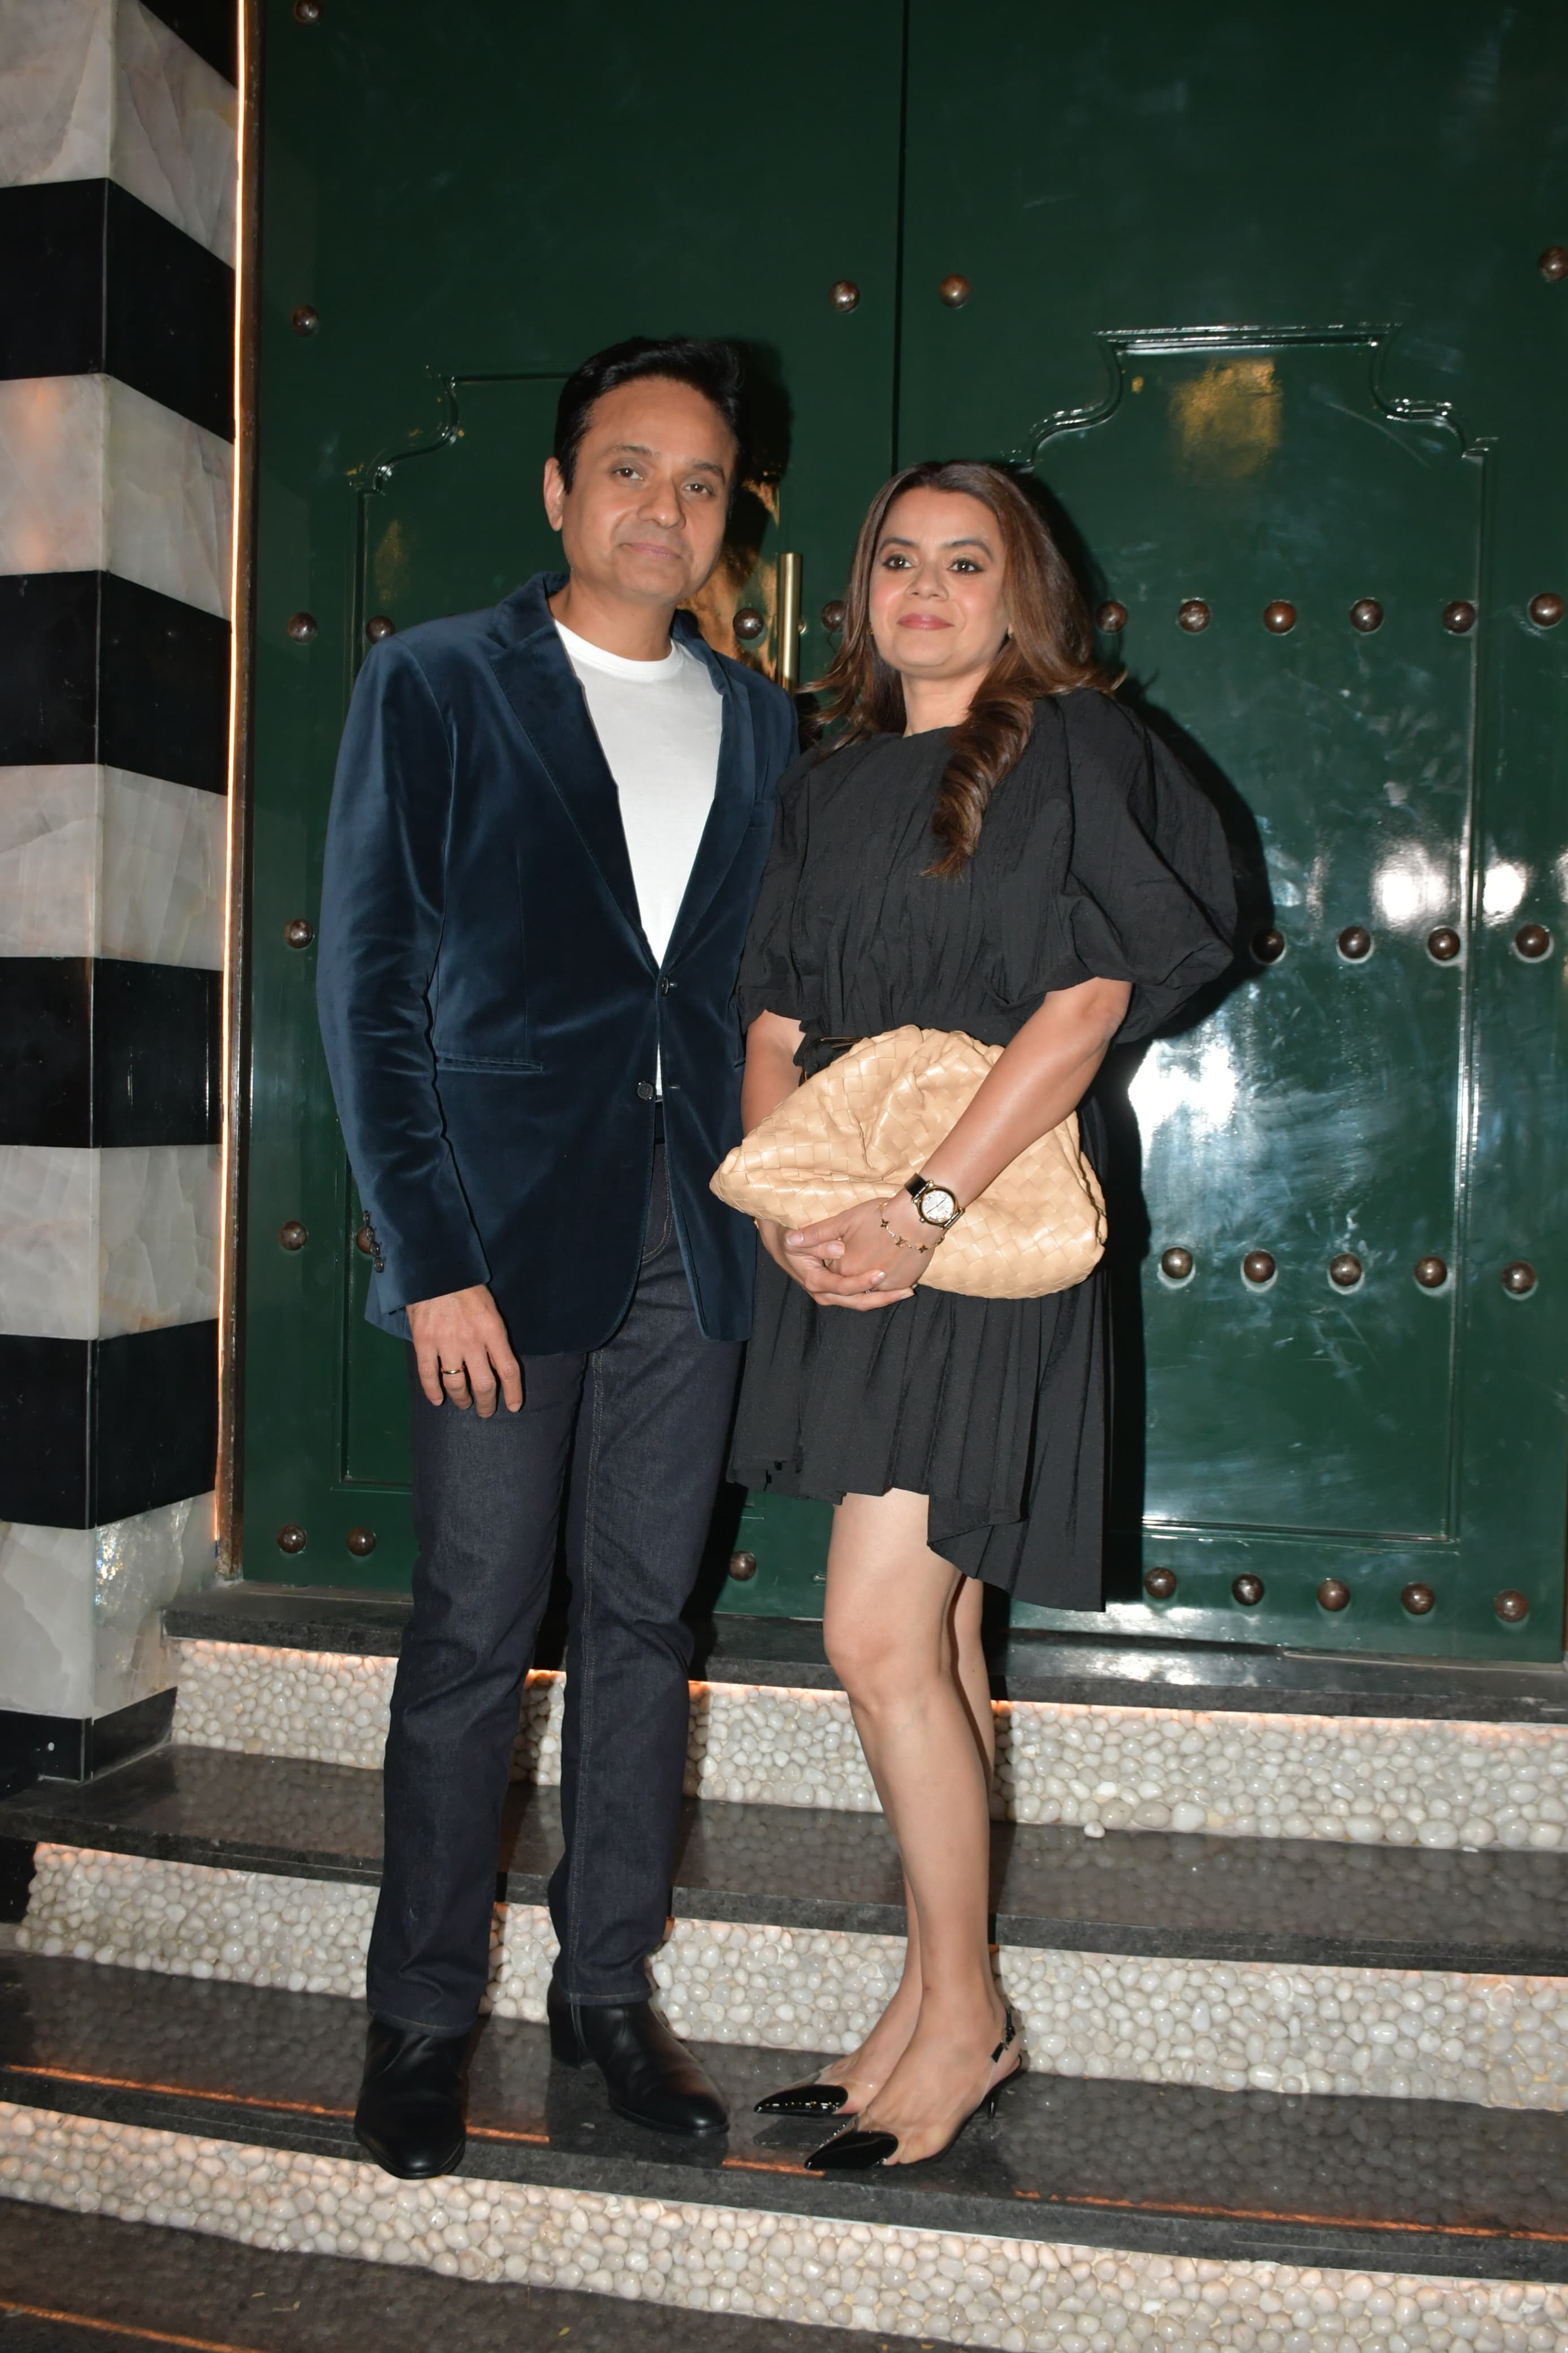 Bijal Mehta and Apoorva Mehta were also invited to the intimate party